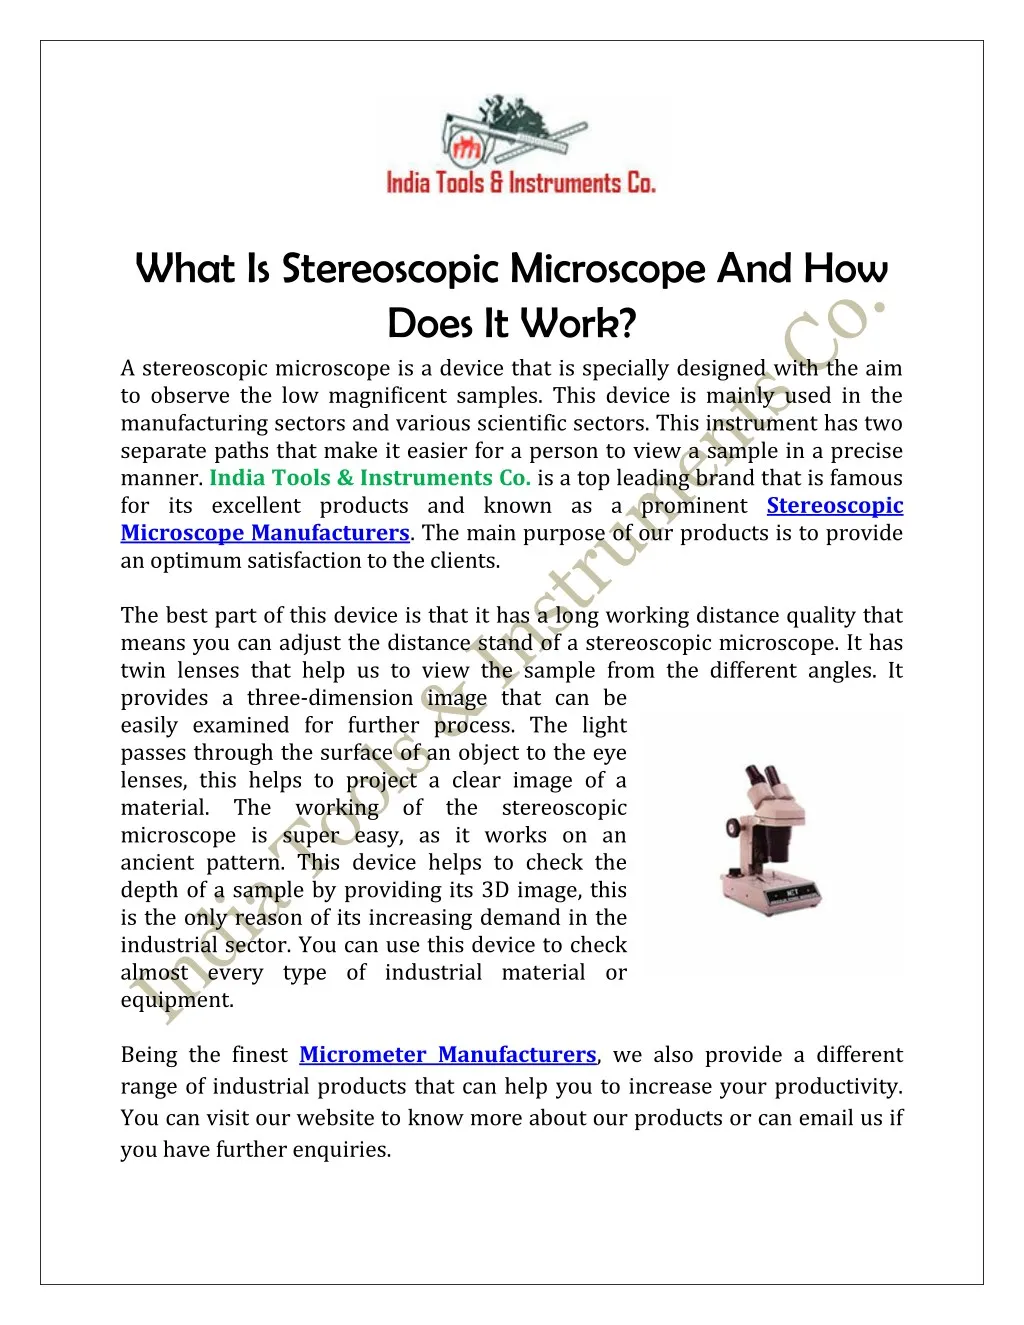 what is stereoscopic microscope and how does